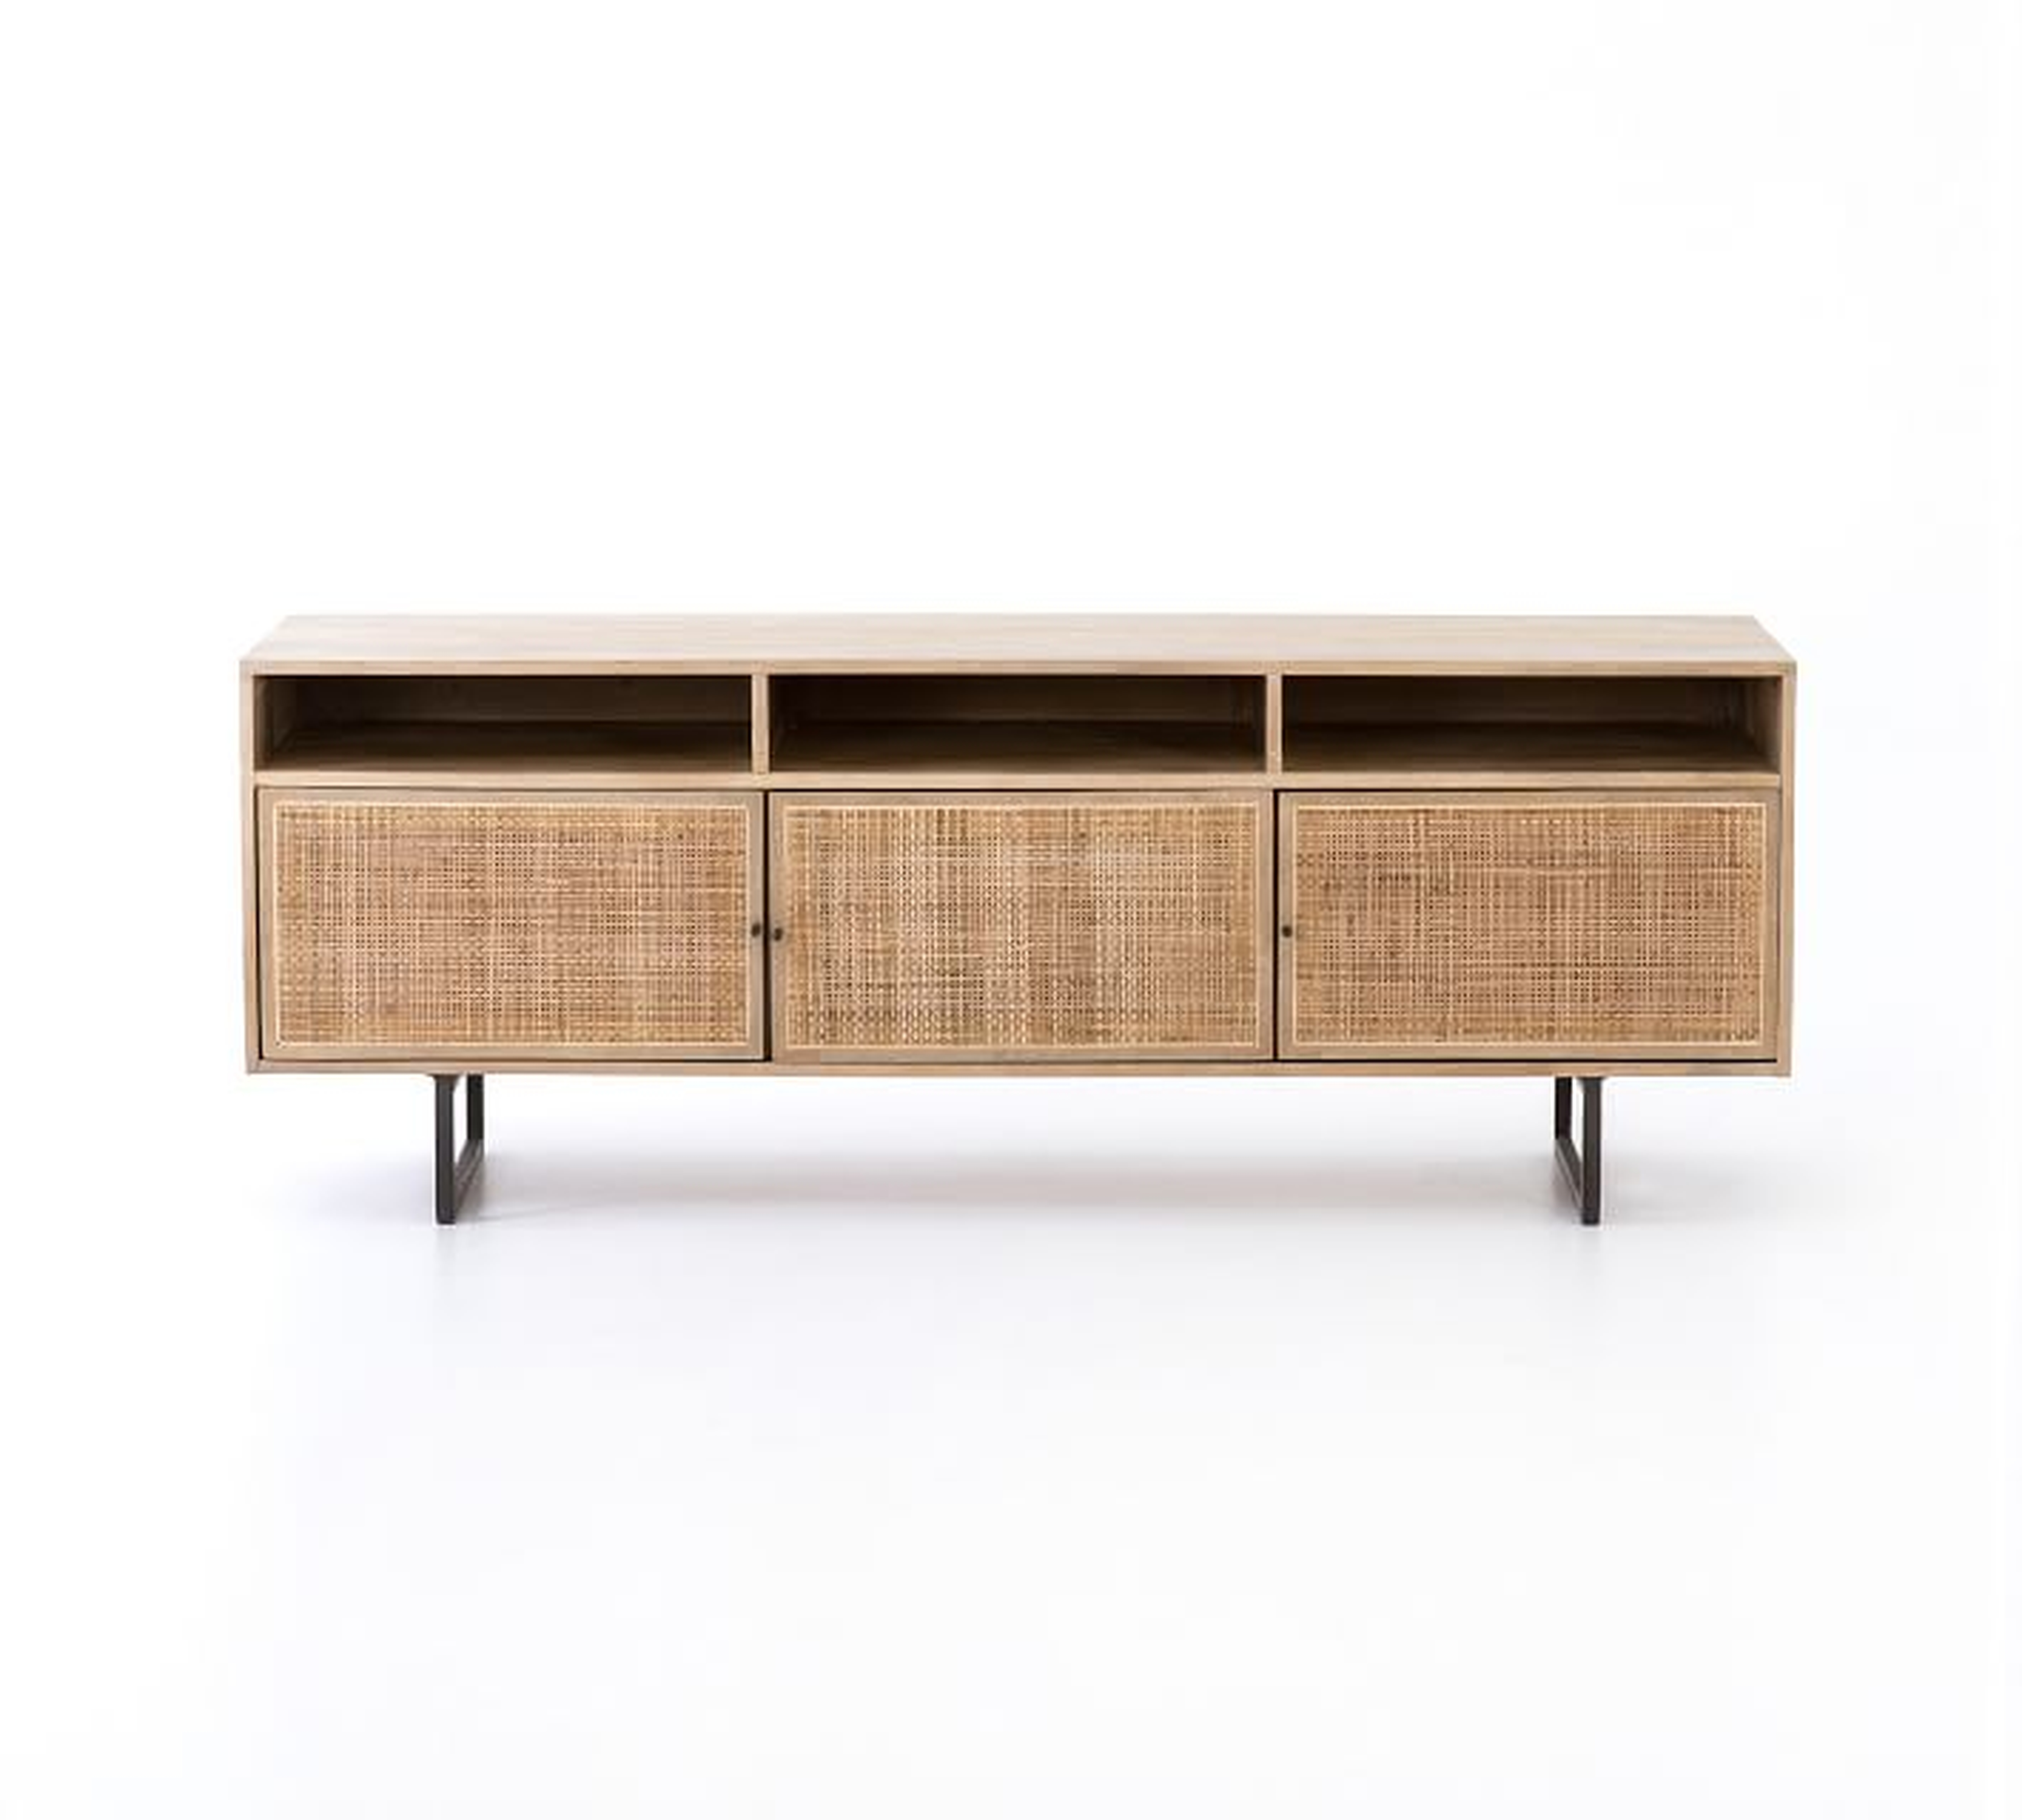 Dolores Cane Media Console - Natural - Pottery Barn